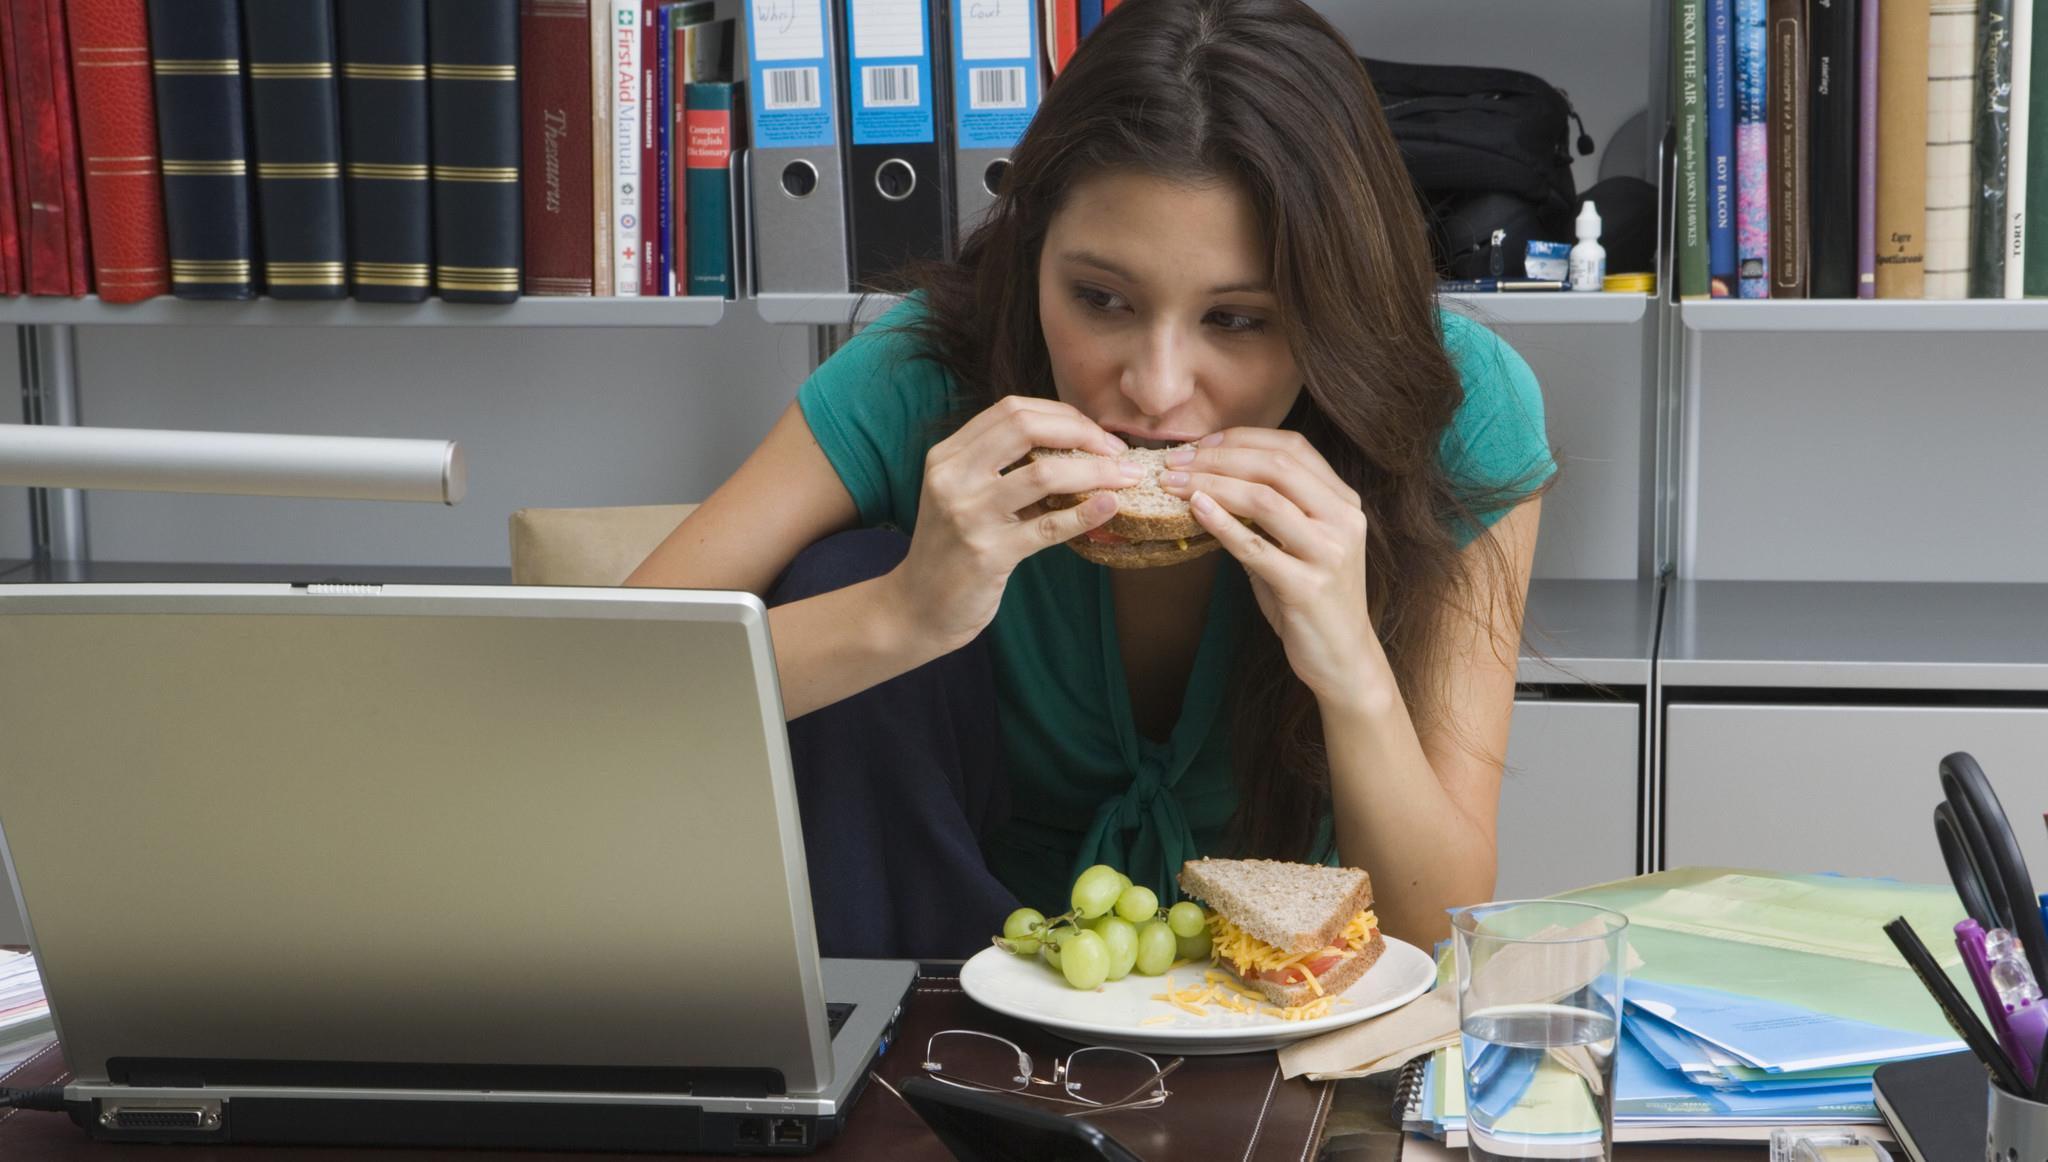 5 Ways to Rejuvenate During Your Lunch Break